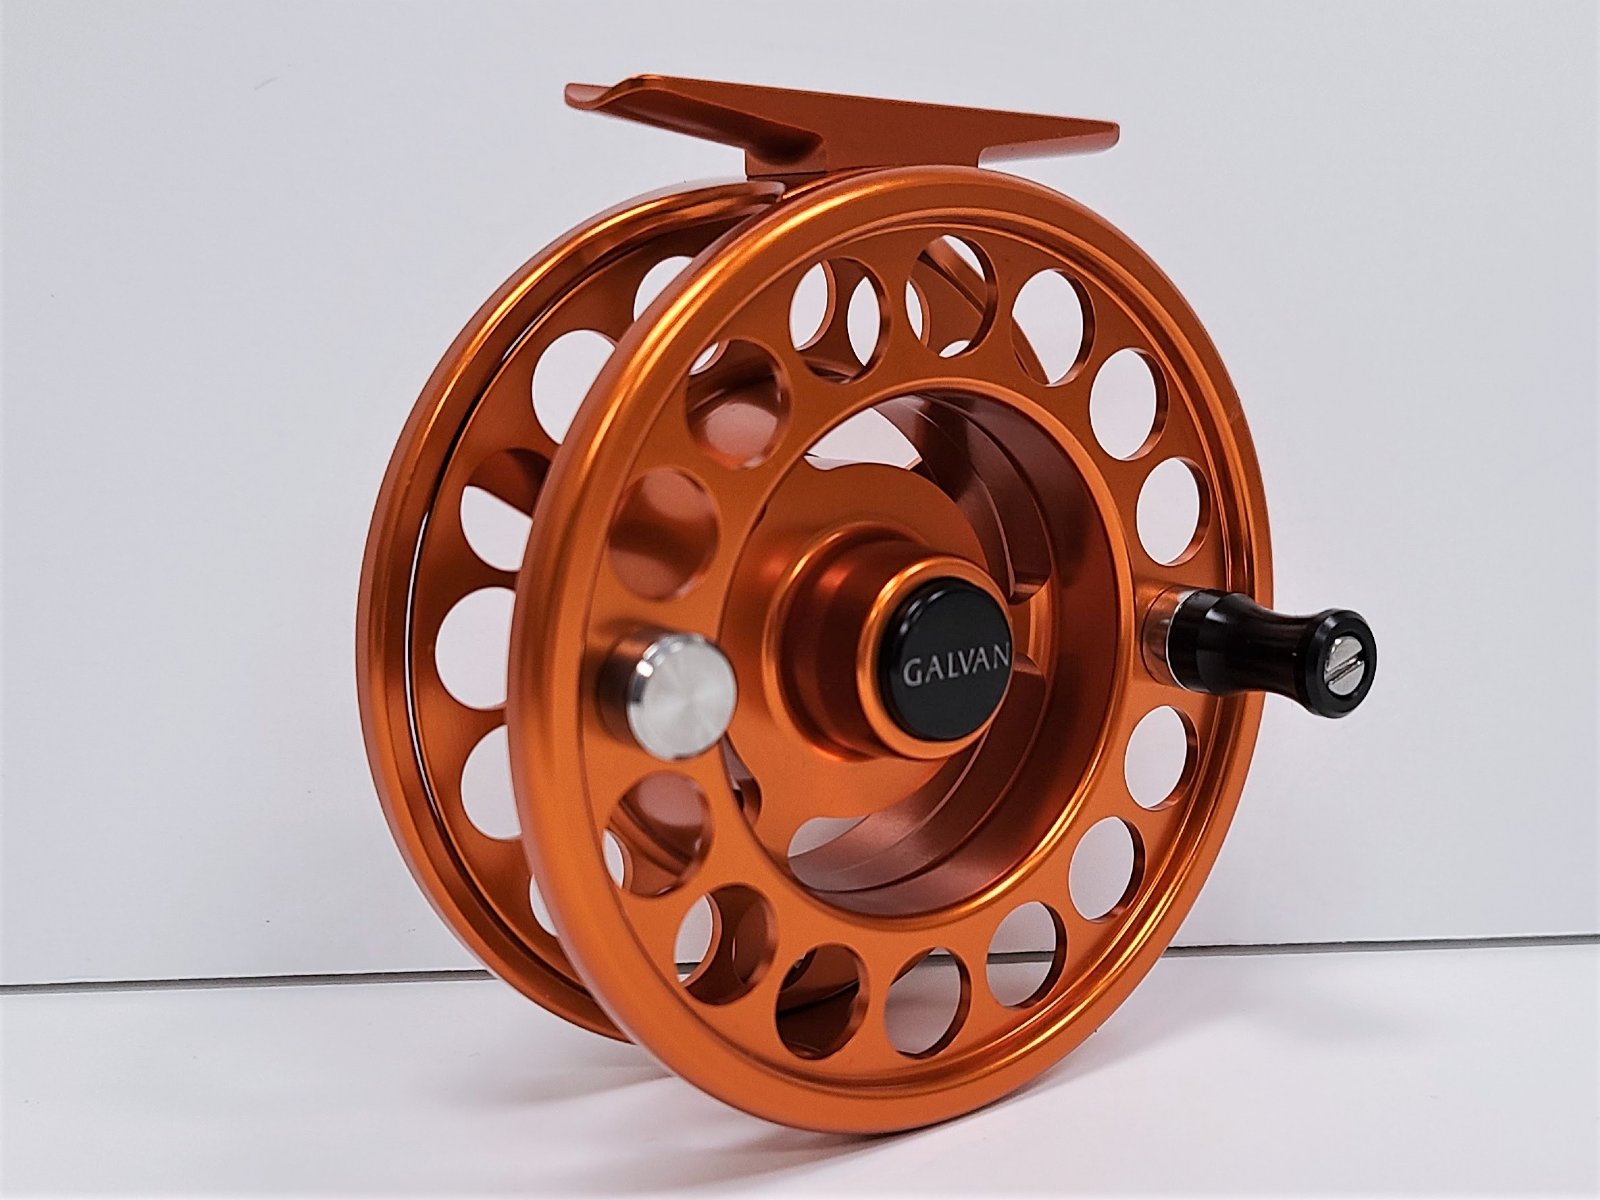 NEW GALVAN R-5 SPARE SPOOL FOR RUSH LT 5 FLY REEL CLEAR FOR 5/6 WT FREE SHIPPING 